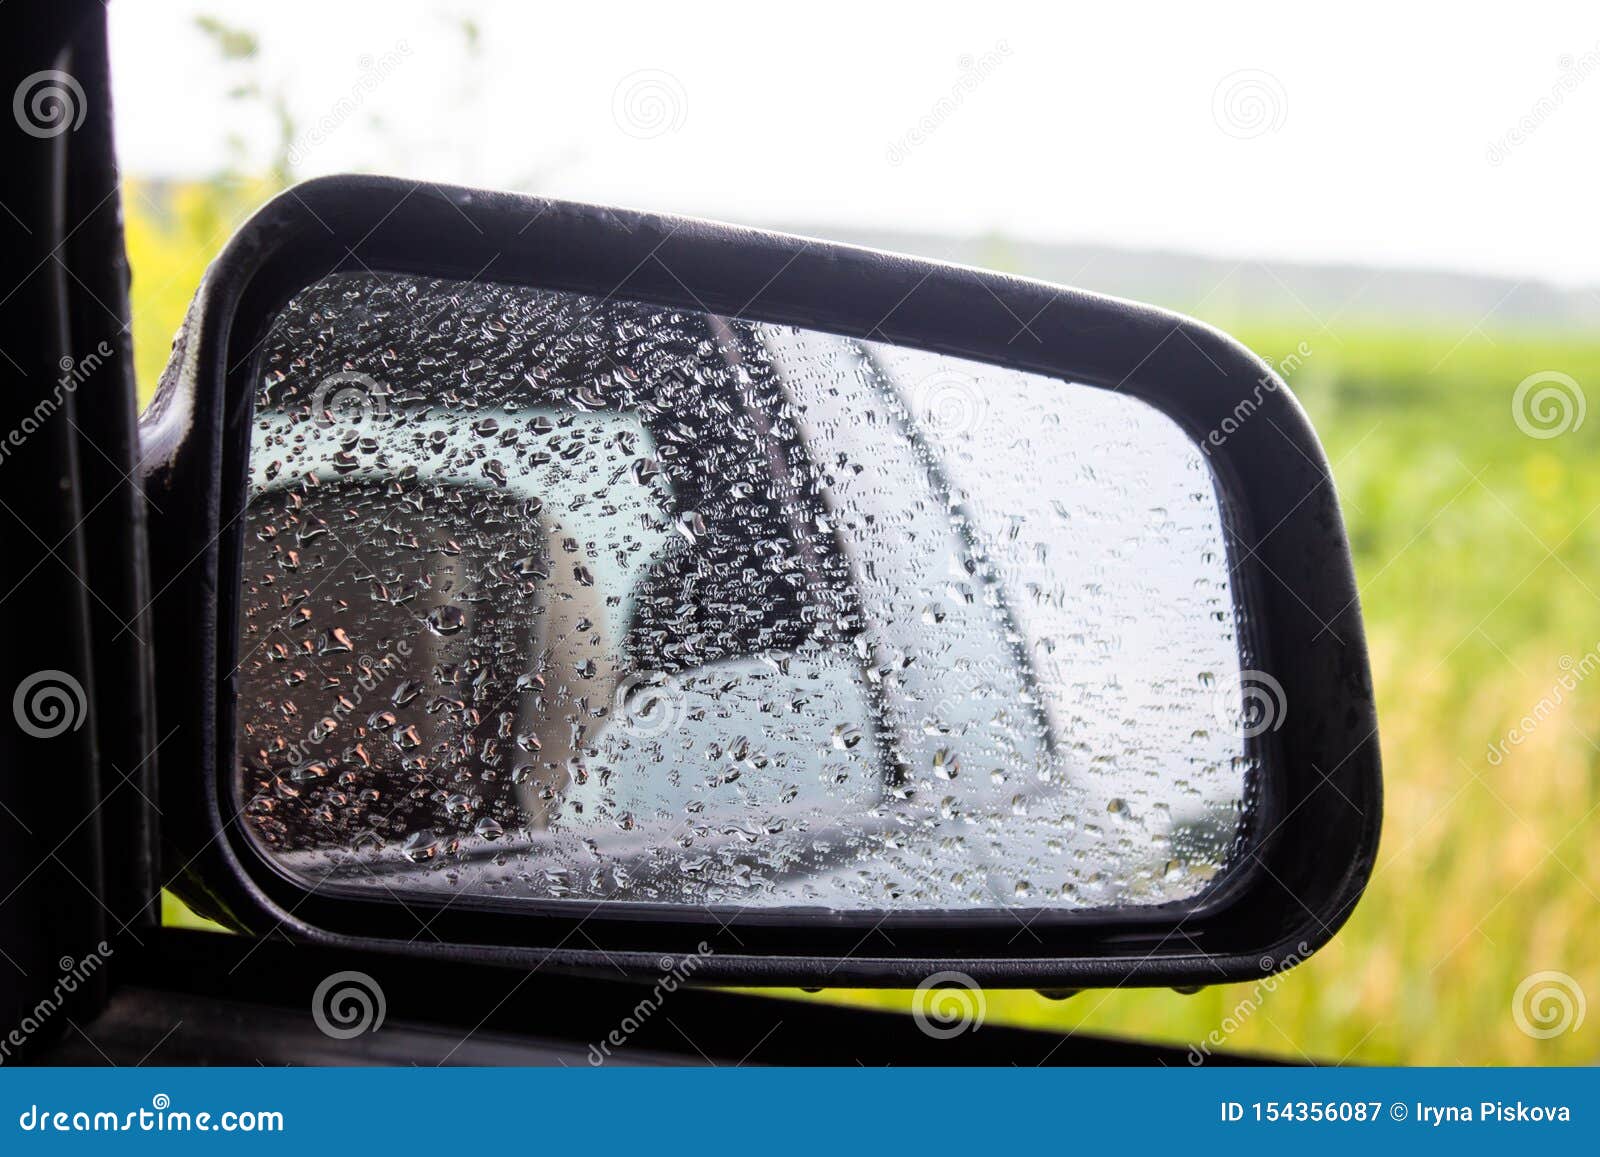 Side Window Of The Car In The Drops After The Rain. Stock Image - Image